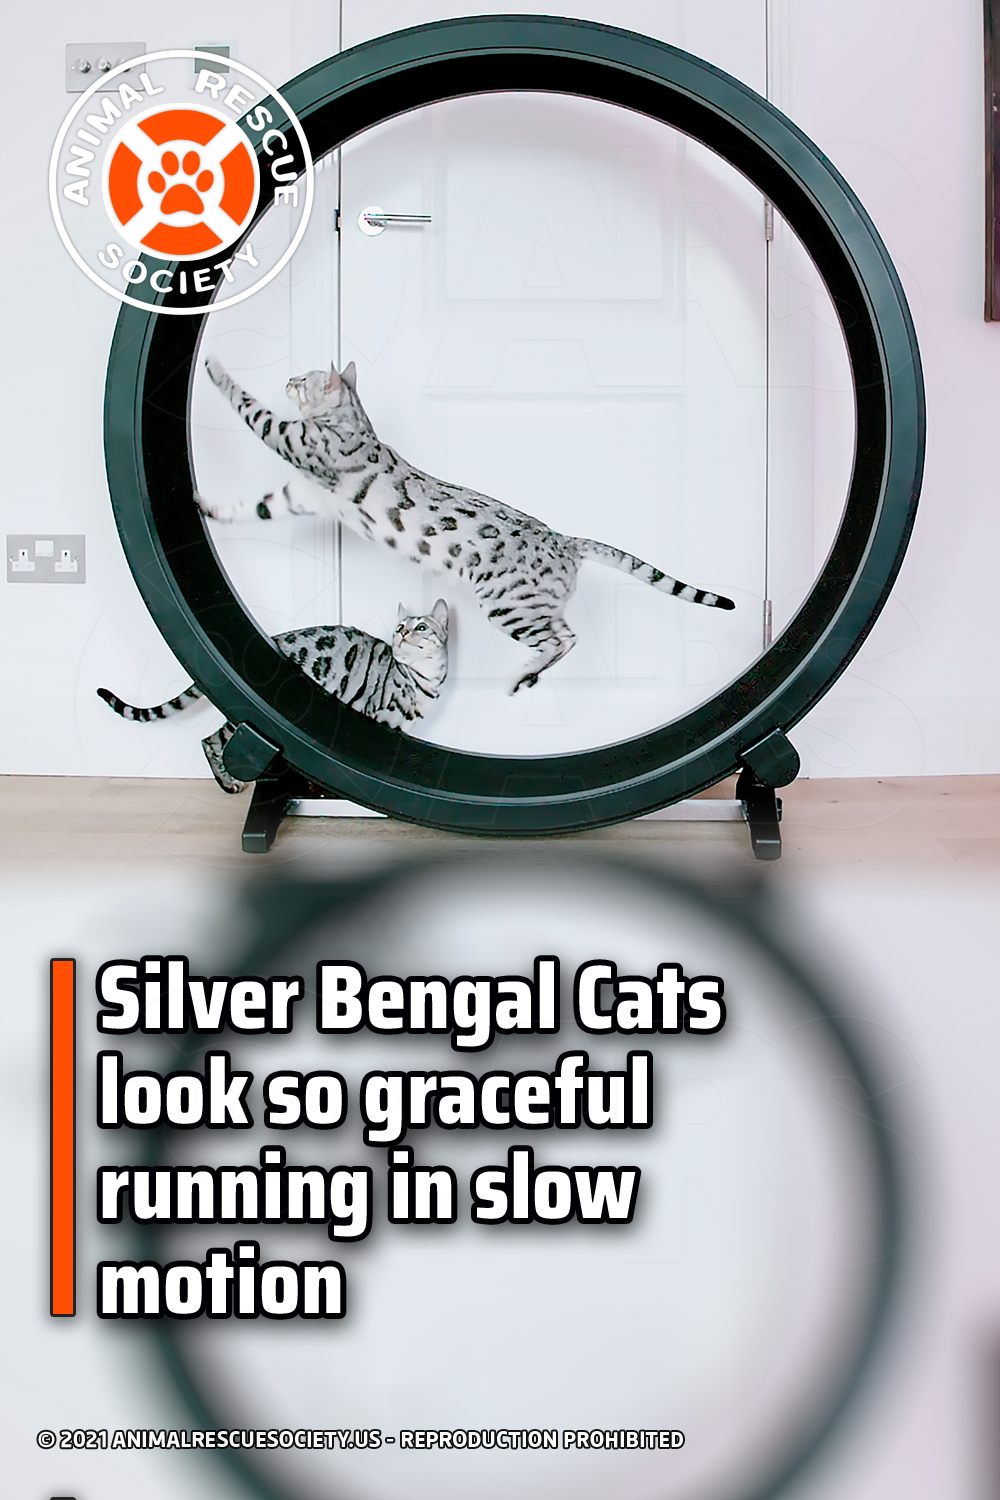 Silver Bengal Cats look so graceful running in slow motion